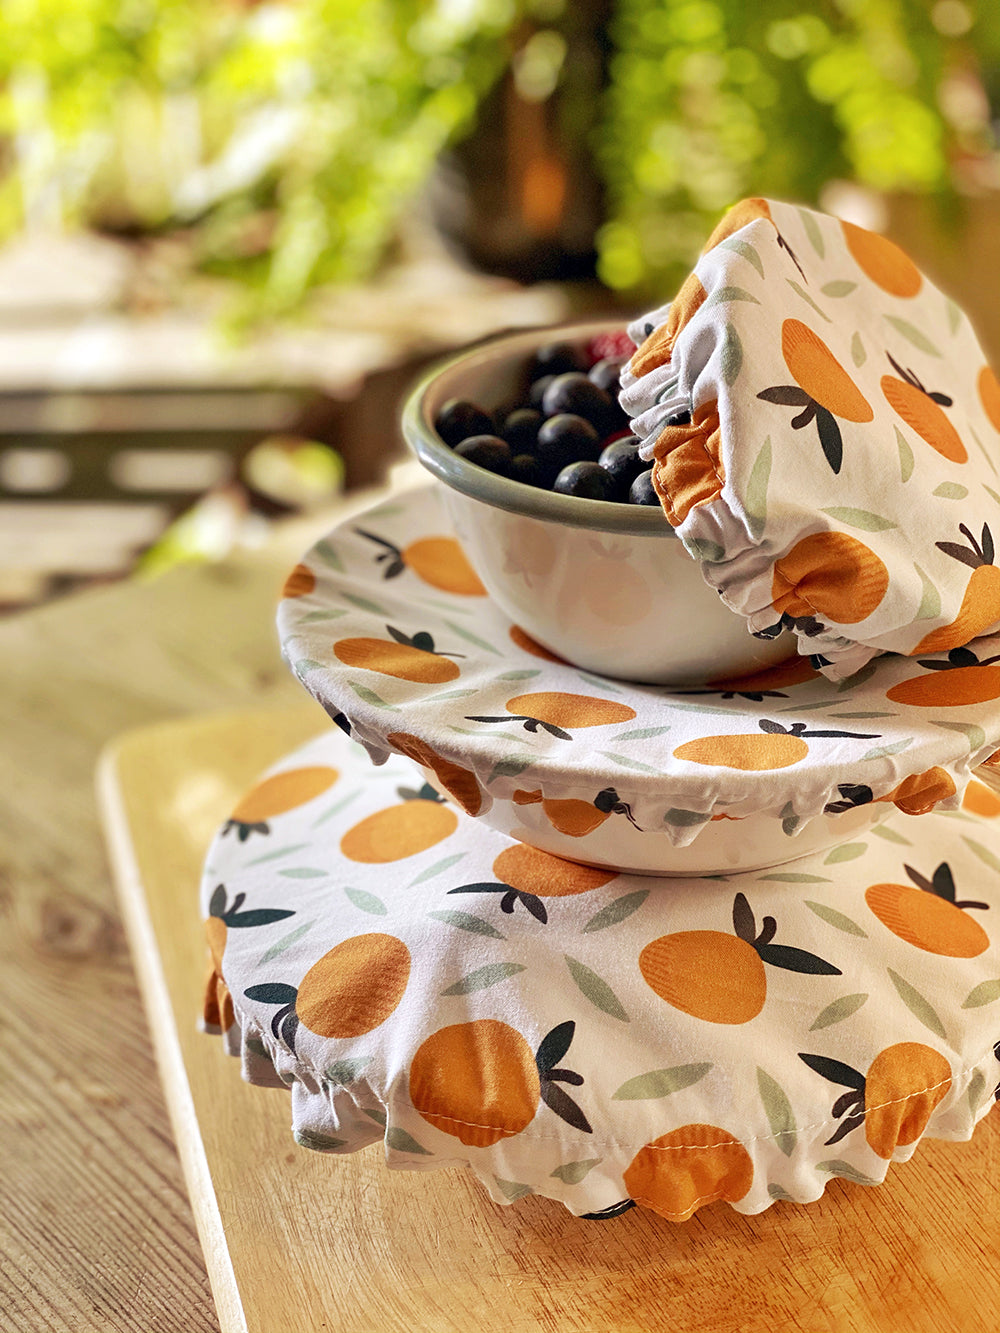 Fruits Reusable Washable Cotton Fabric Food Baking Bread Fruit Mixer Bowl Covers | Zero Waste Eco-friendly Sustainable Gift Kitchen Tool Accessory